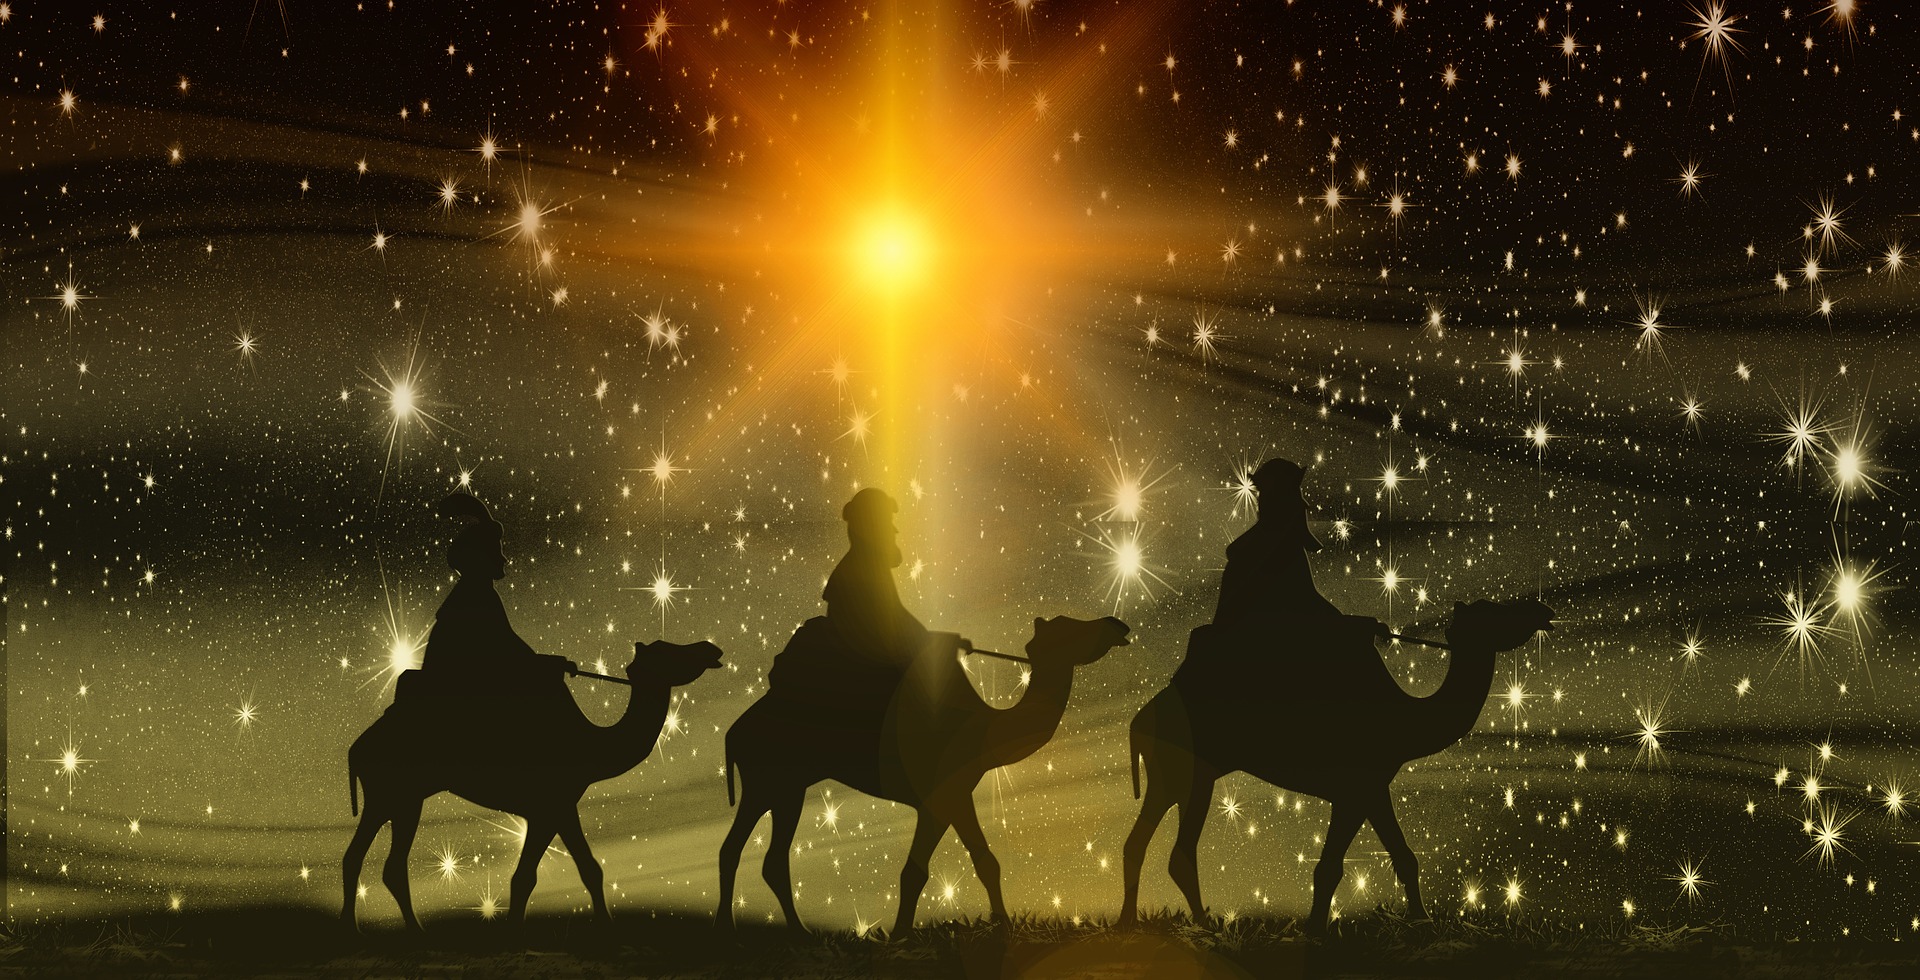 The Arab Magi and the Star of Bethlehem The Acts 211 Project